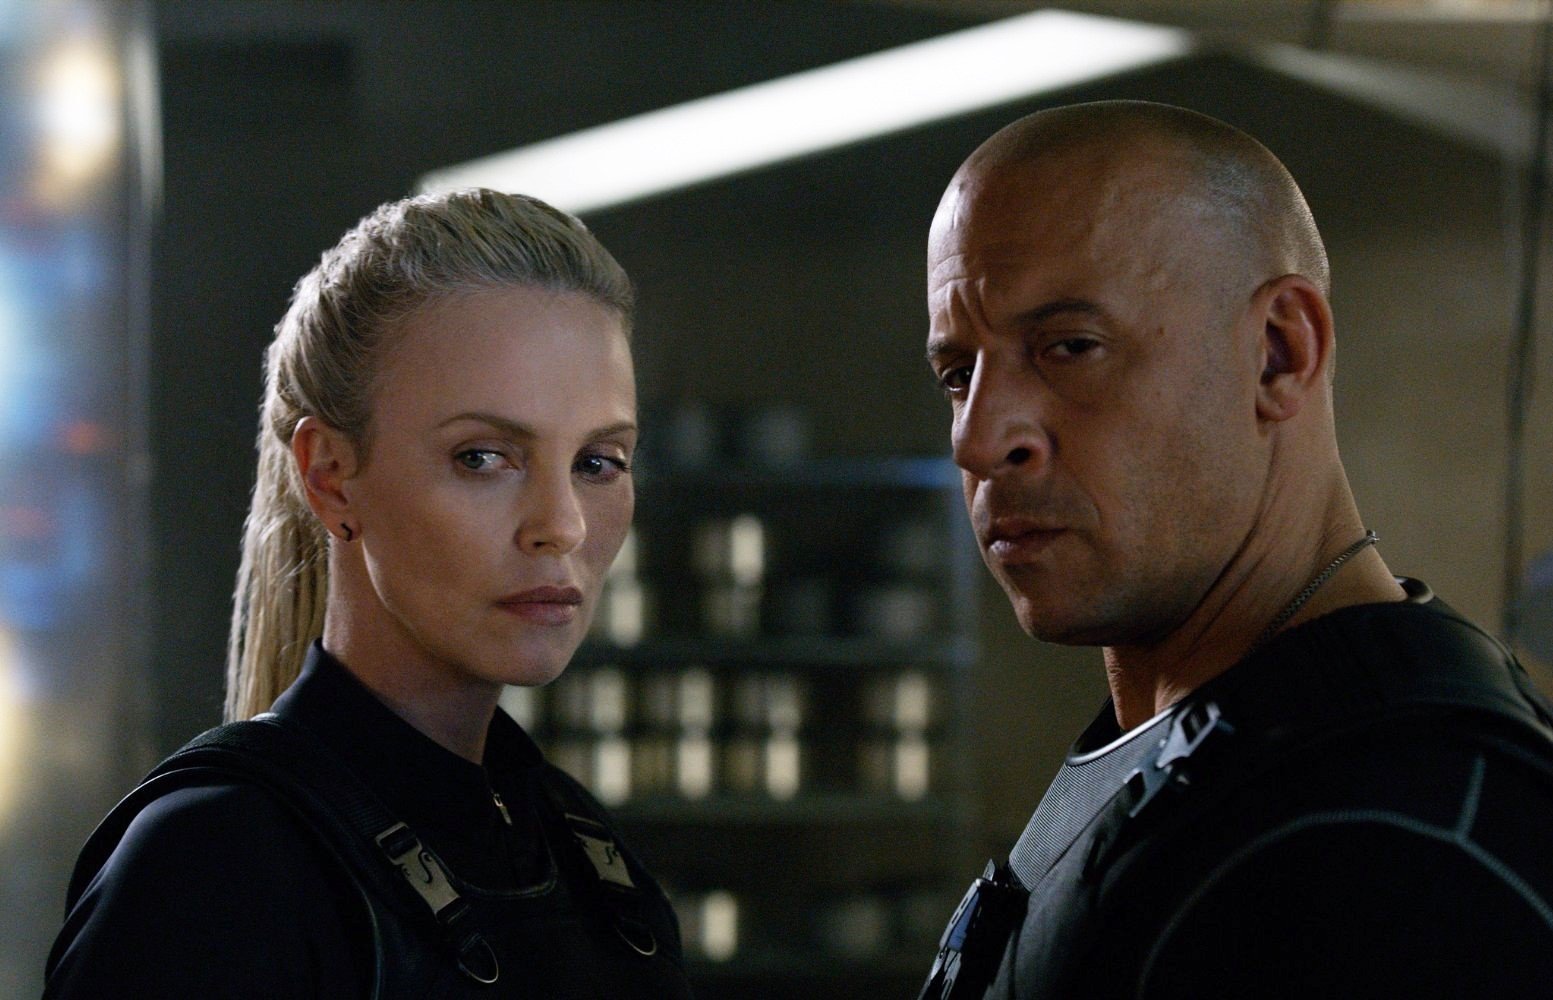 Charlize Theron stars as Cipher and Vin Diesel stars as Dominic Toretto in Universal Pictures' The Fate of the Furious (2017)